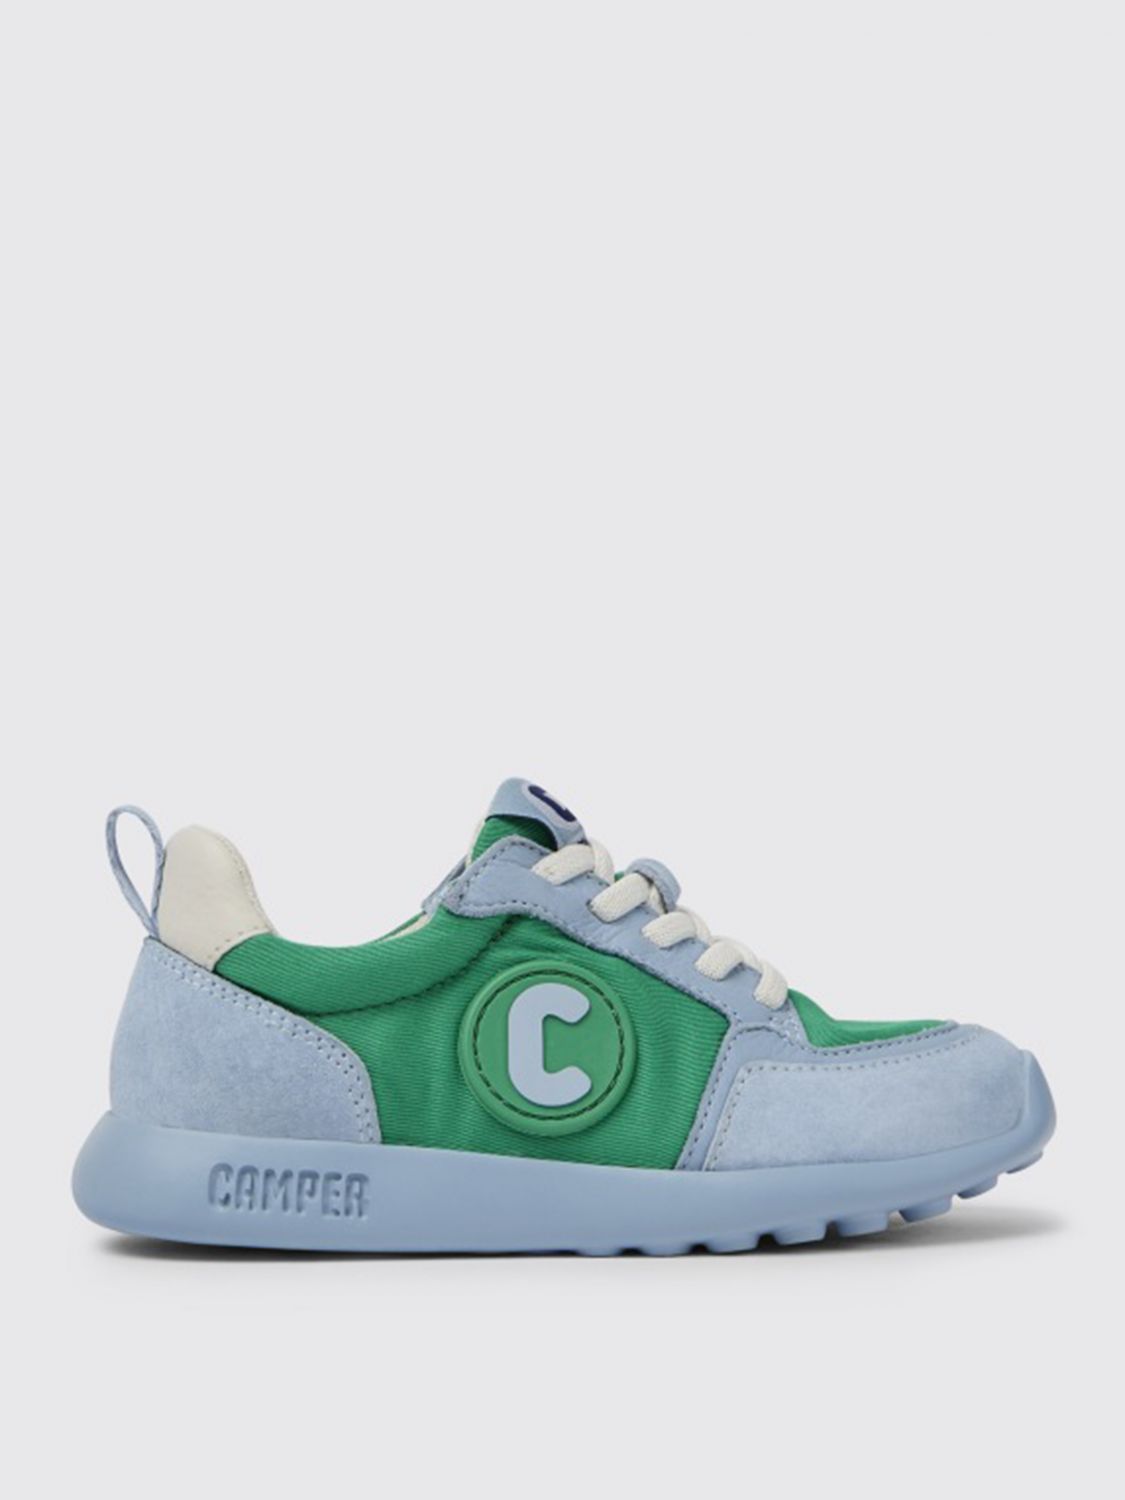 Camper Driftie Camper sneakers in nubuck and recycled polyester